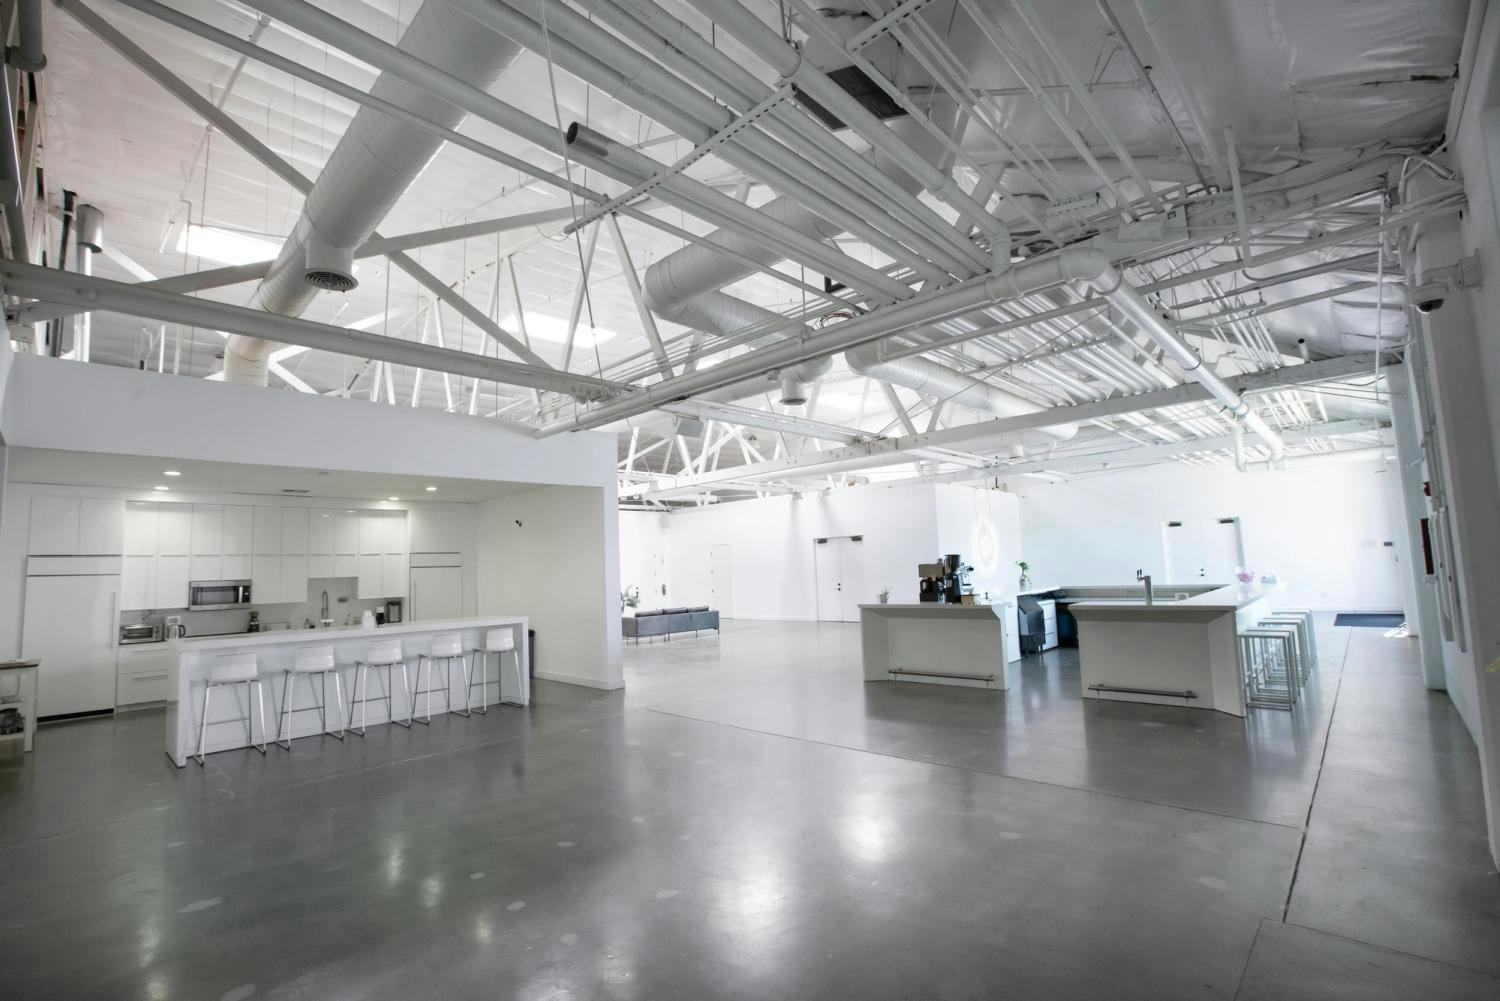 An expansive gallery with polished concrete floors, high ceilings with exposed ductwork, and a kitchen and seating area in the distance.